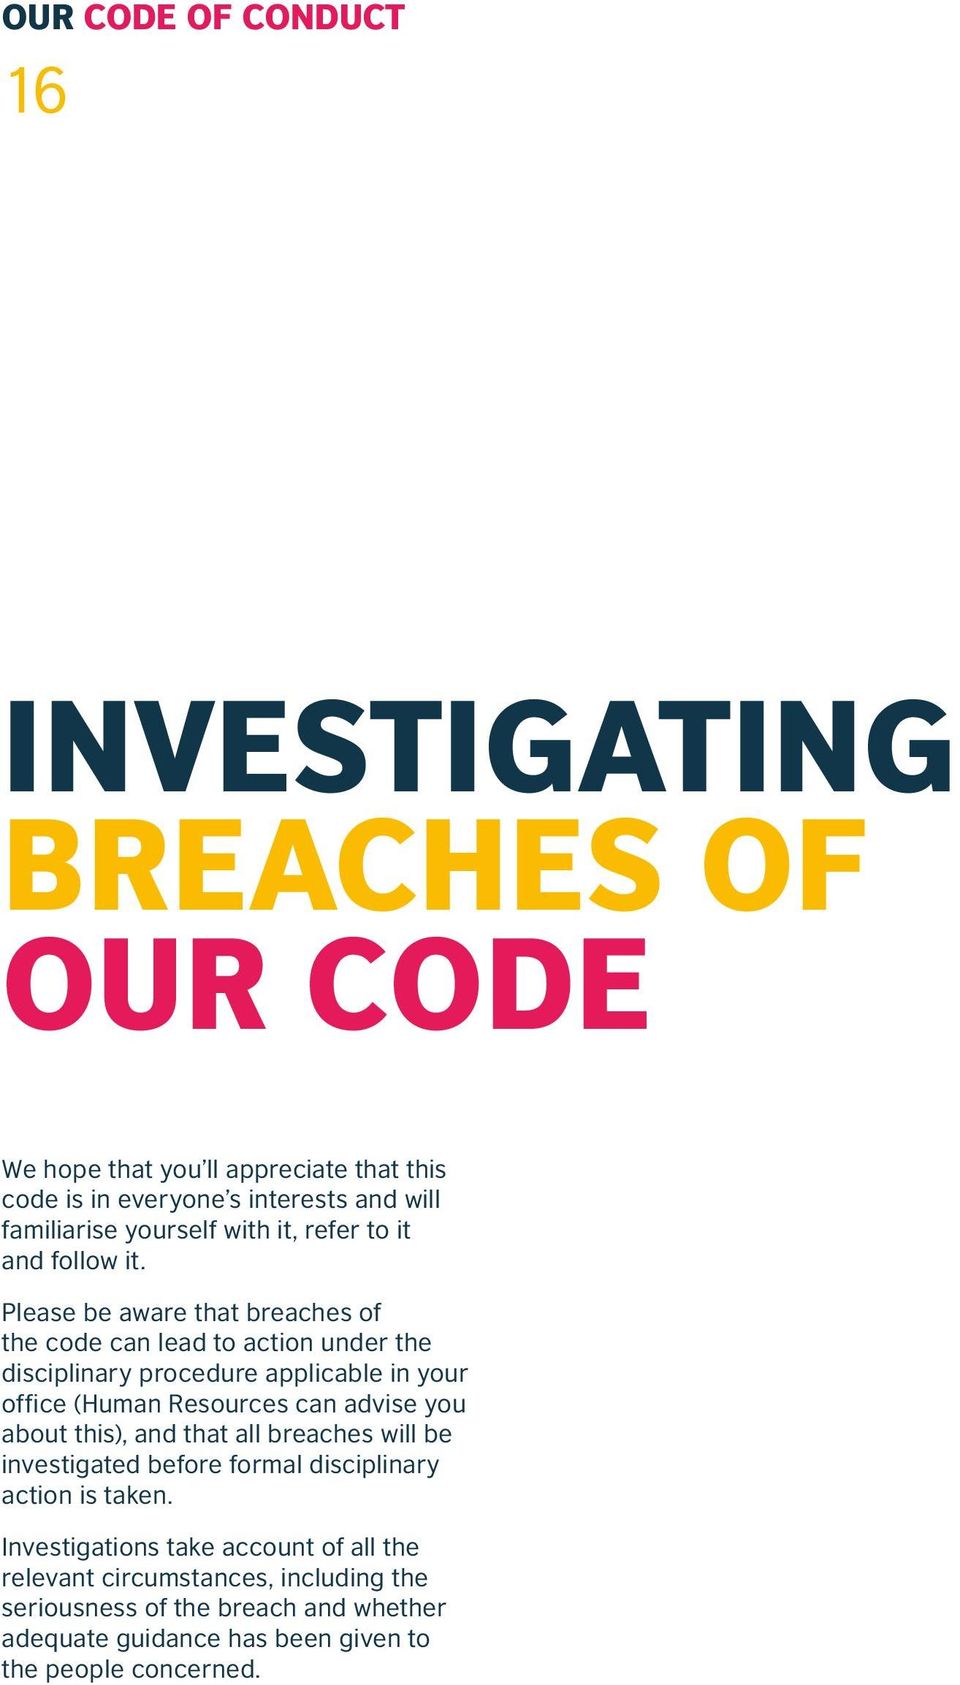 Please be aware that breaches of the code can lead to action under the disciplinary procedure applicable in your office (Human Resources can advise